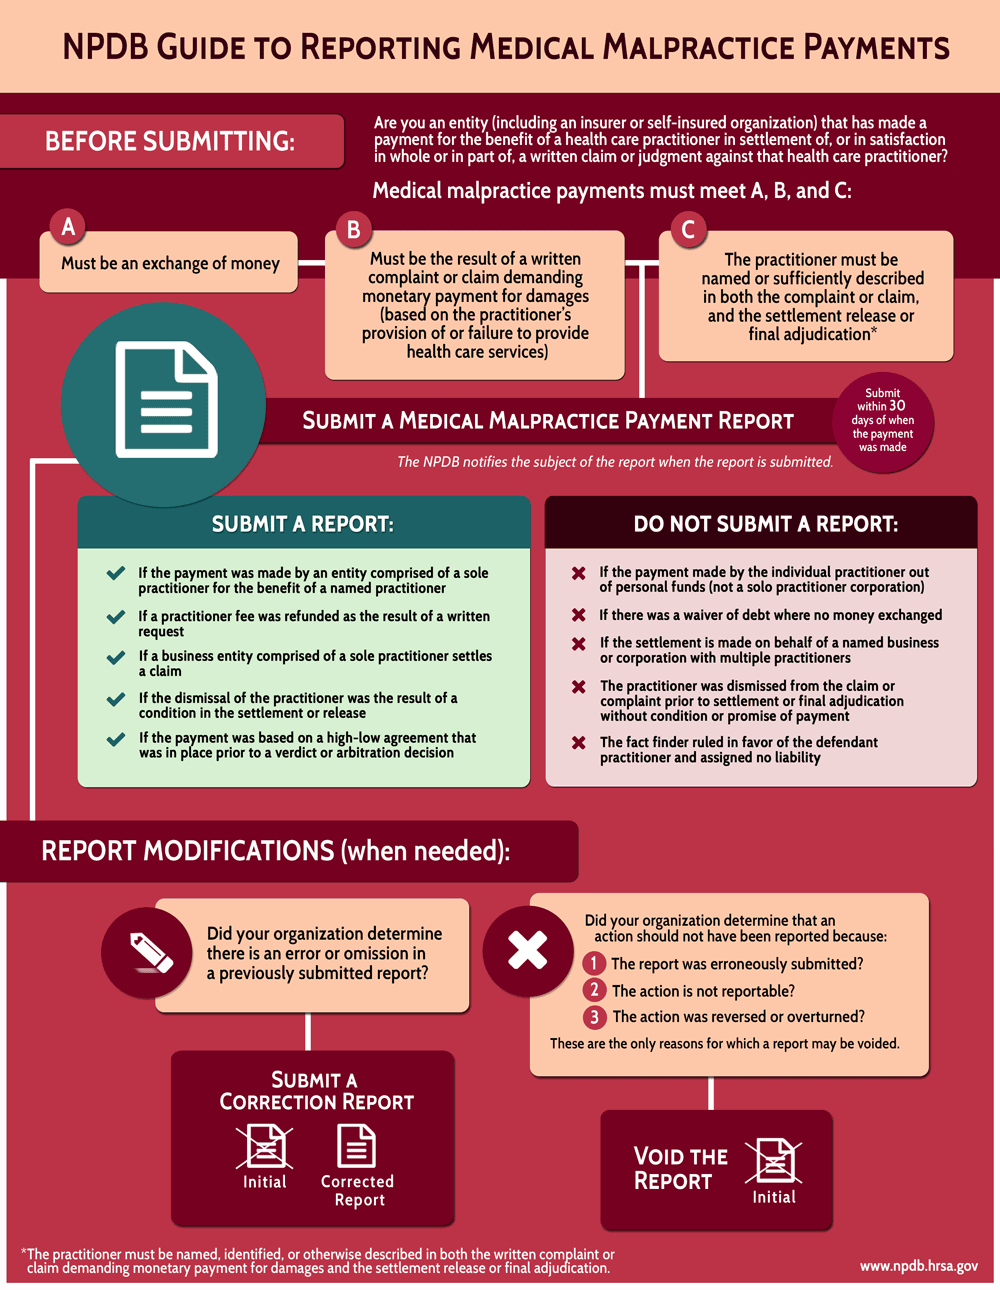 Mini Image of the Reporting Medical Malpractice Payments Infographic